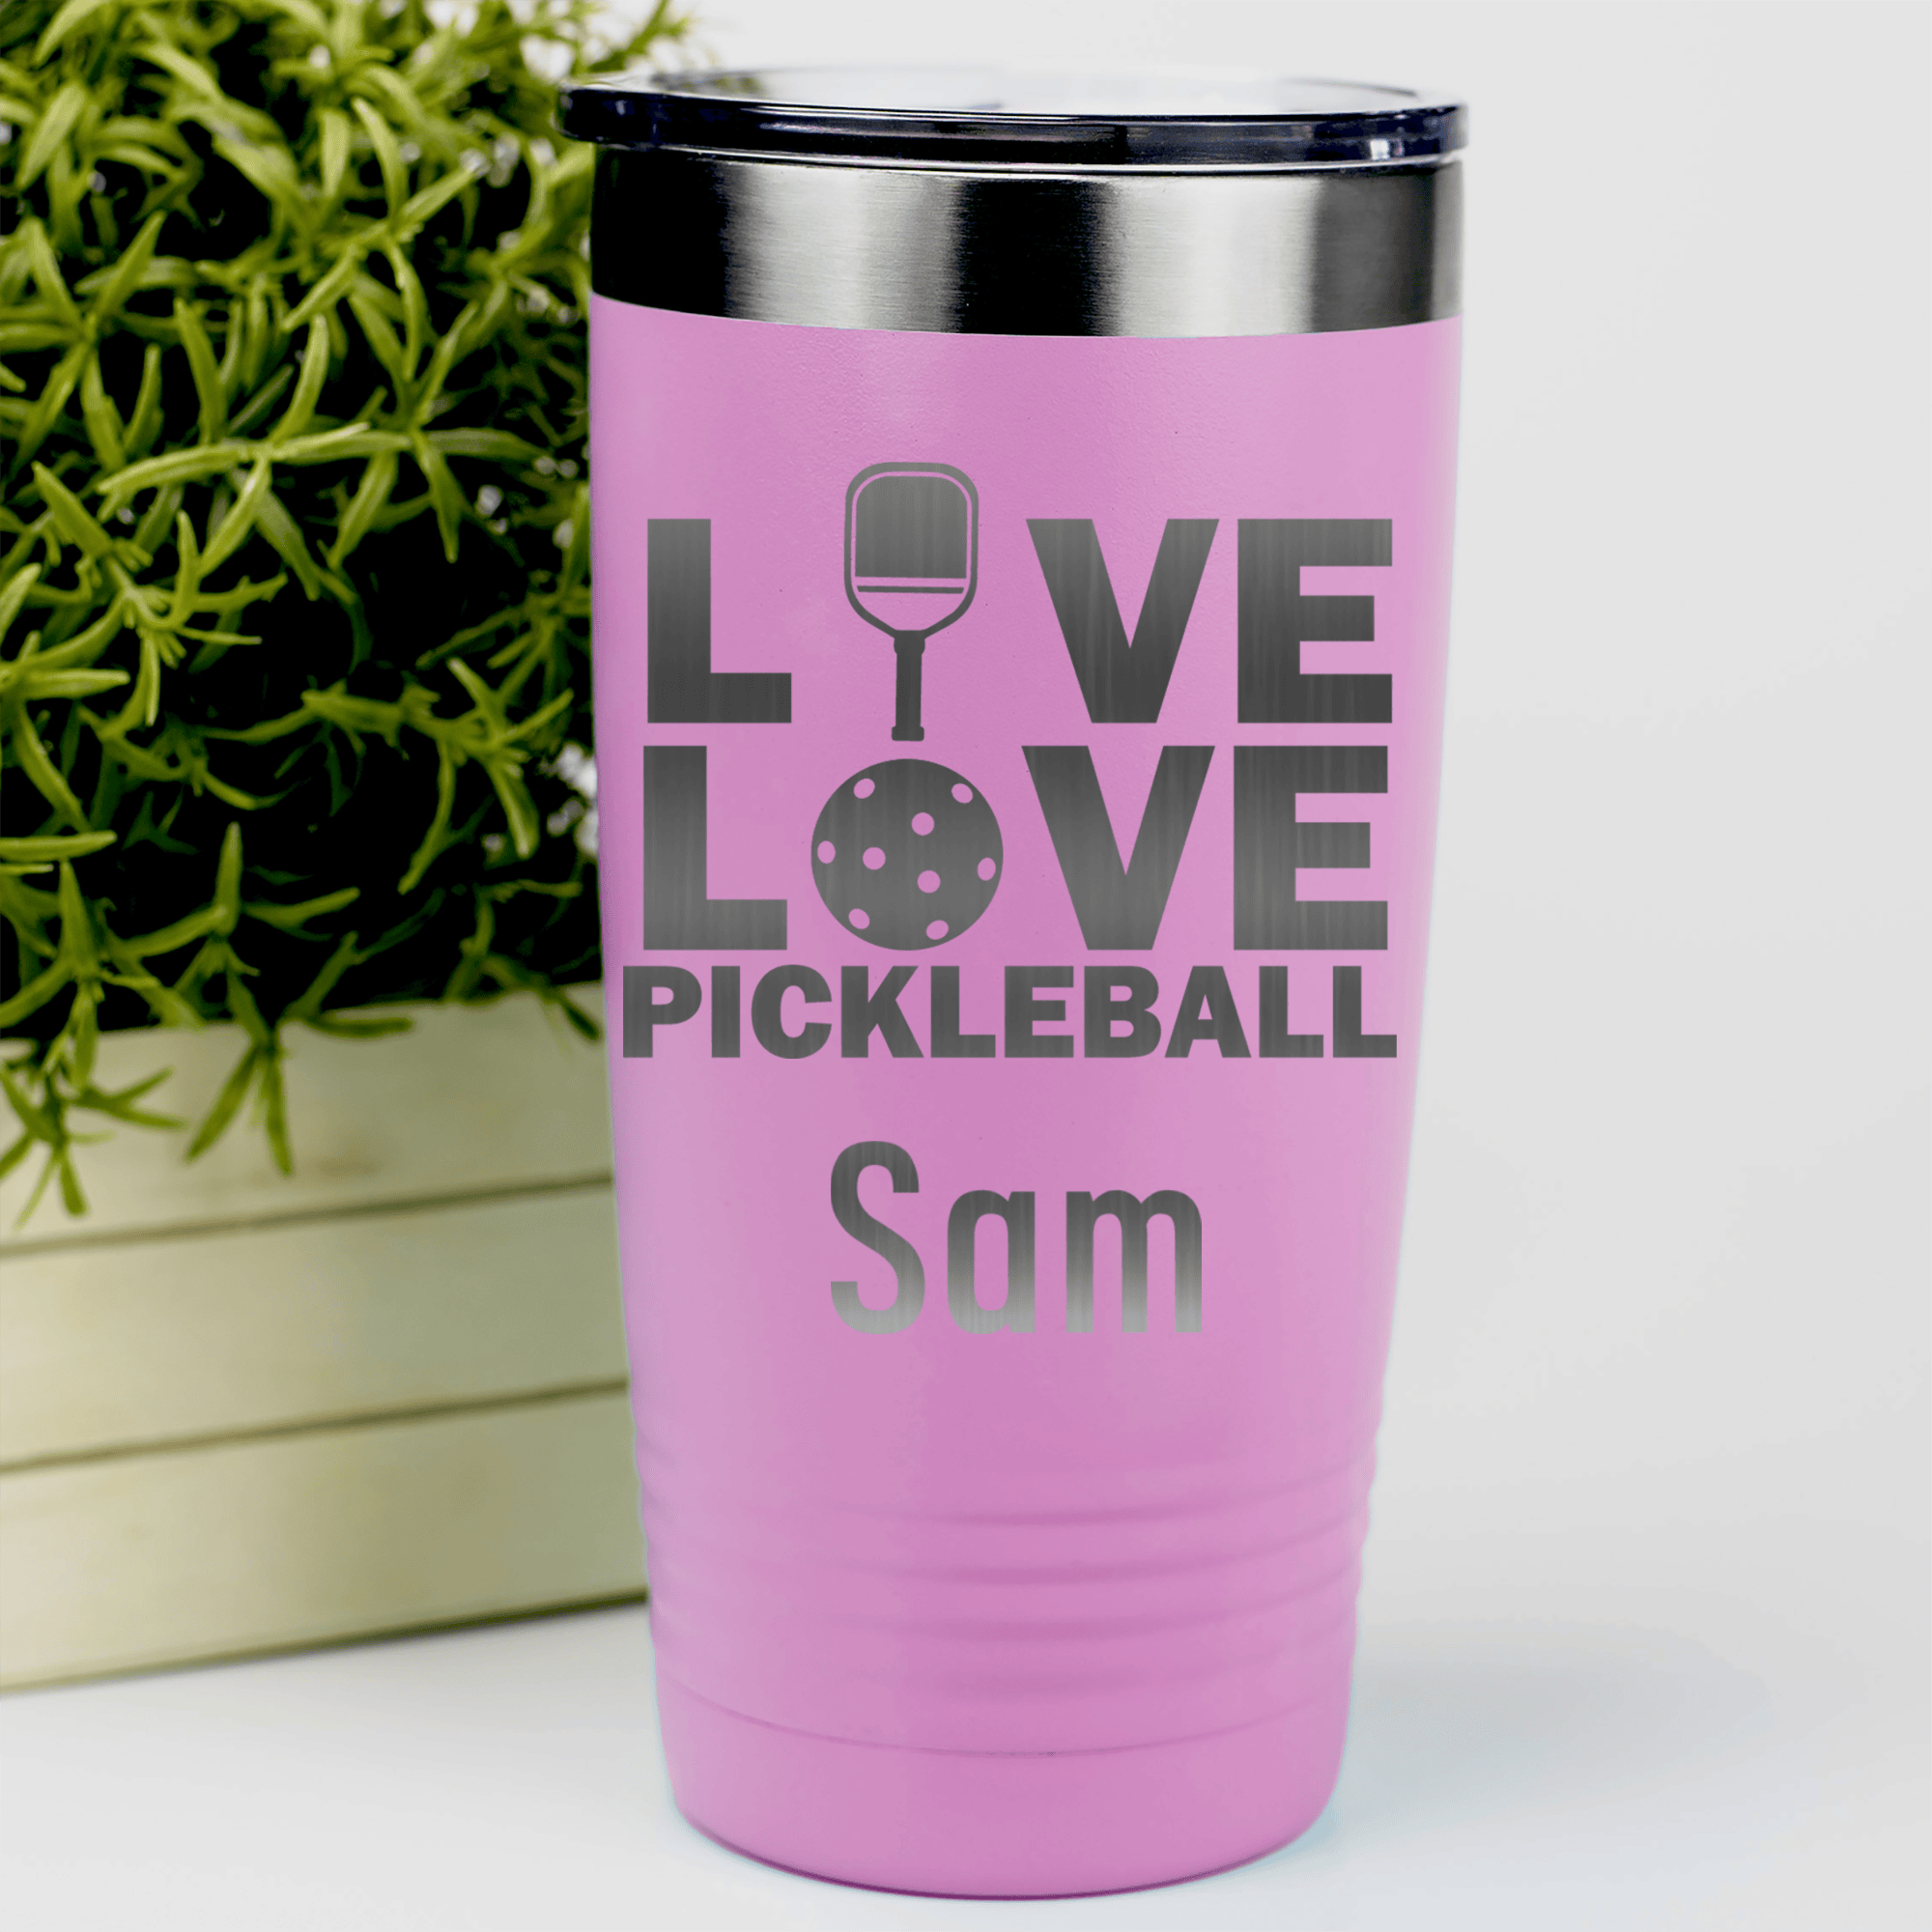 Pink Pickleball Tumbler With Live Love Pickle Design